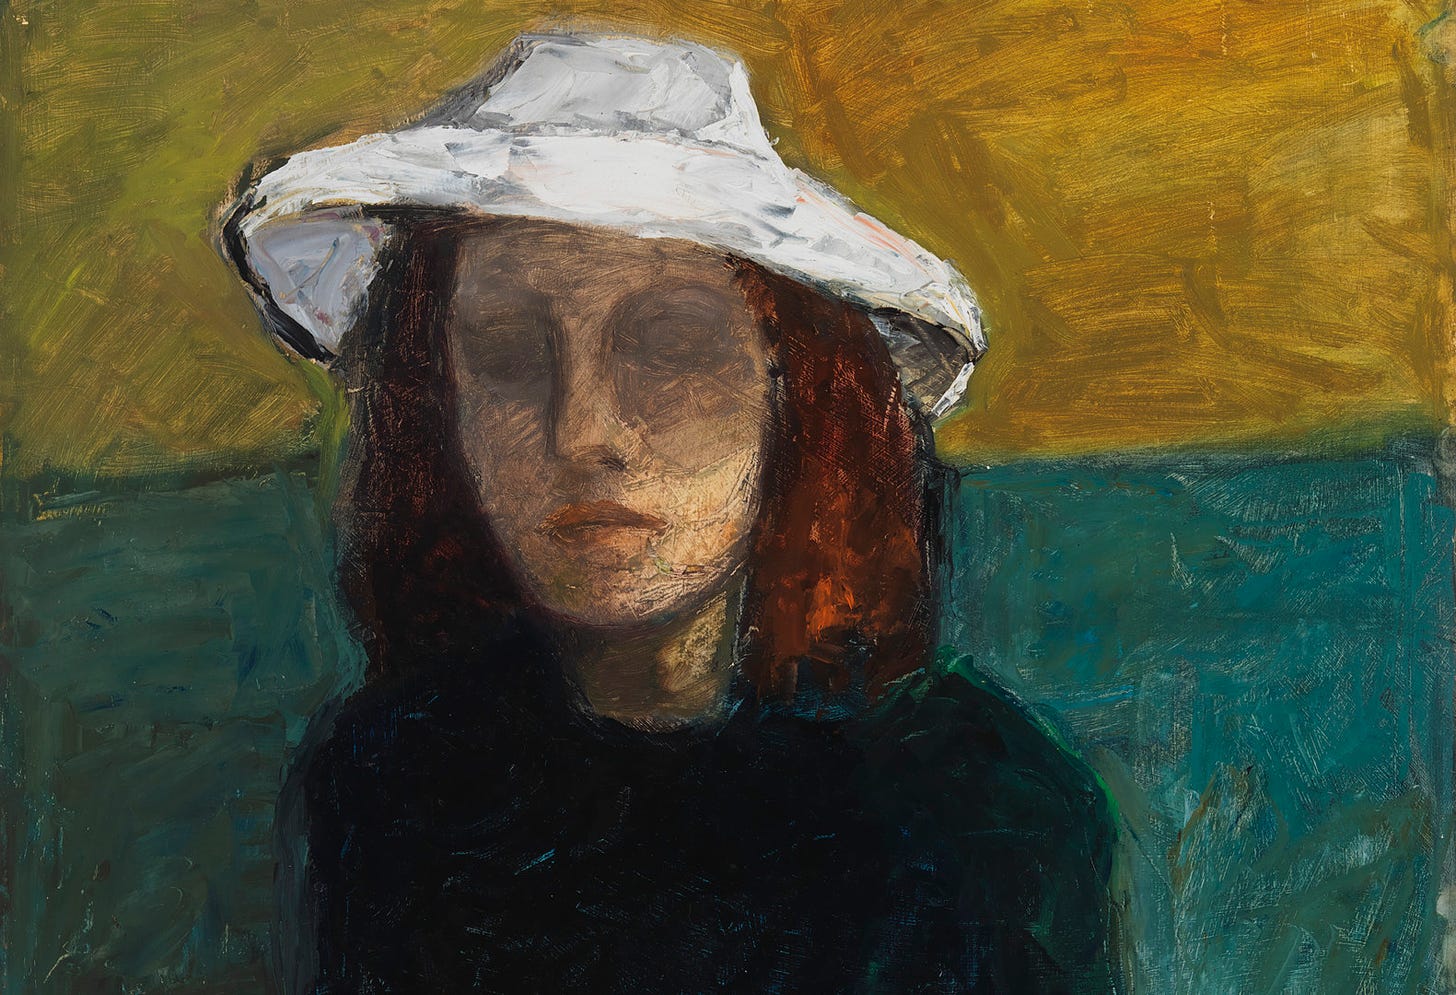 A self-portrait by painter Elga Sesemann, featuring a woman with a white hat, eyes closed.